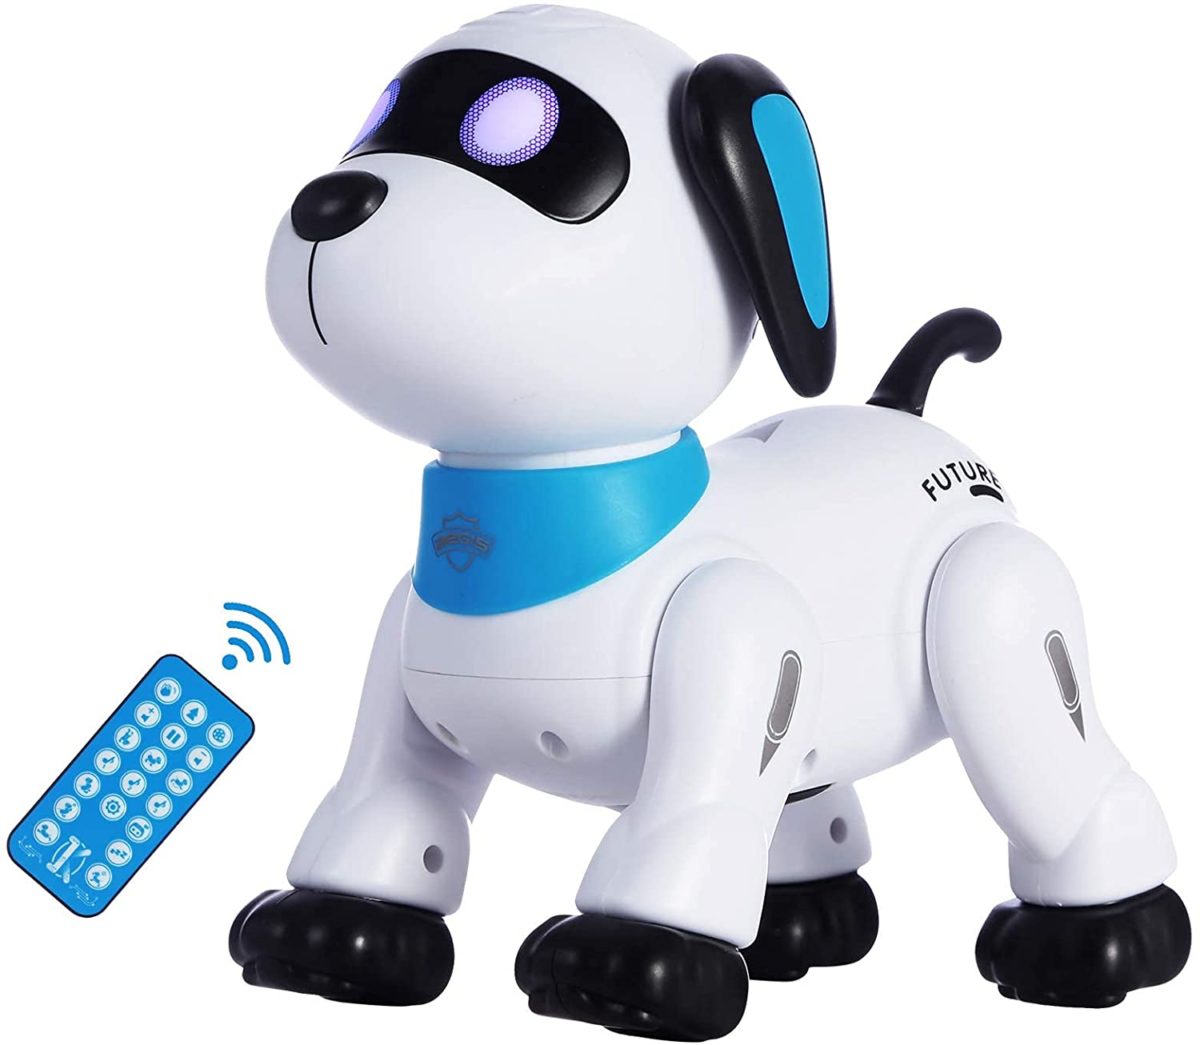 Toys For Girls Kids Children Smart Robot Dog for 3 4 5 6 7 8 9 10 Years Old Age 